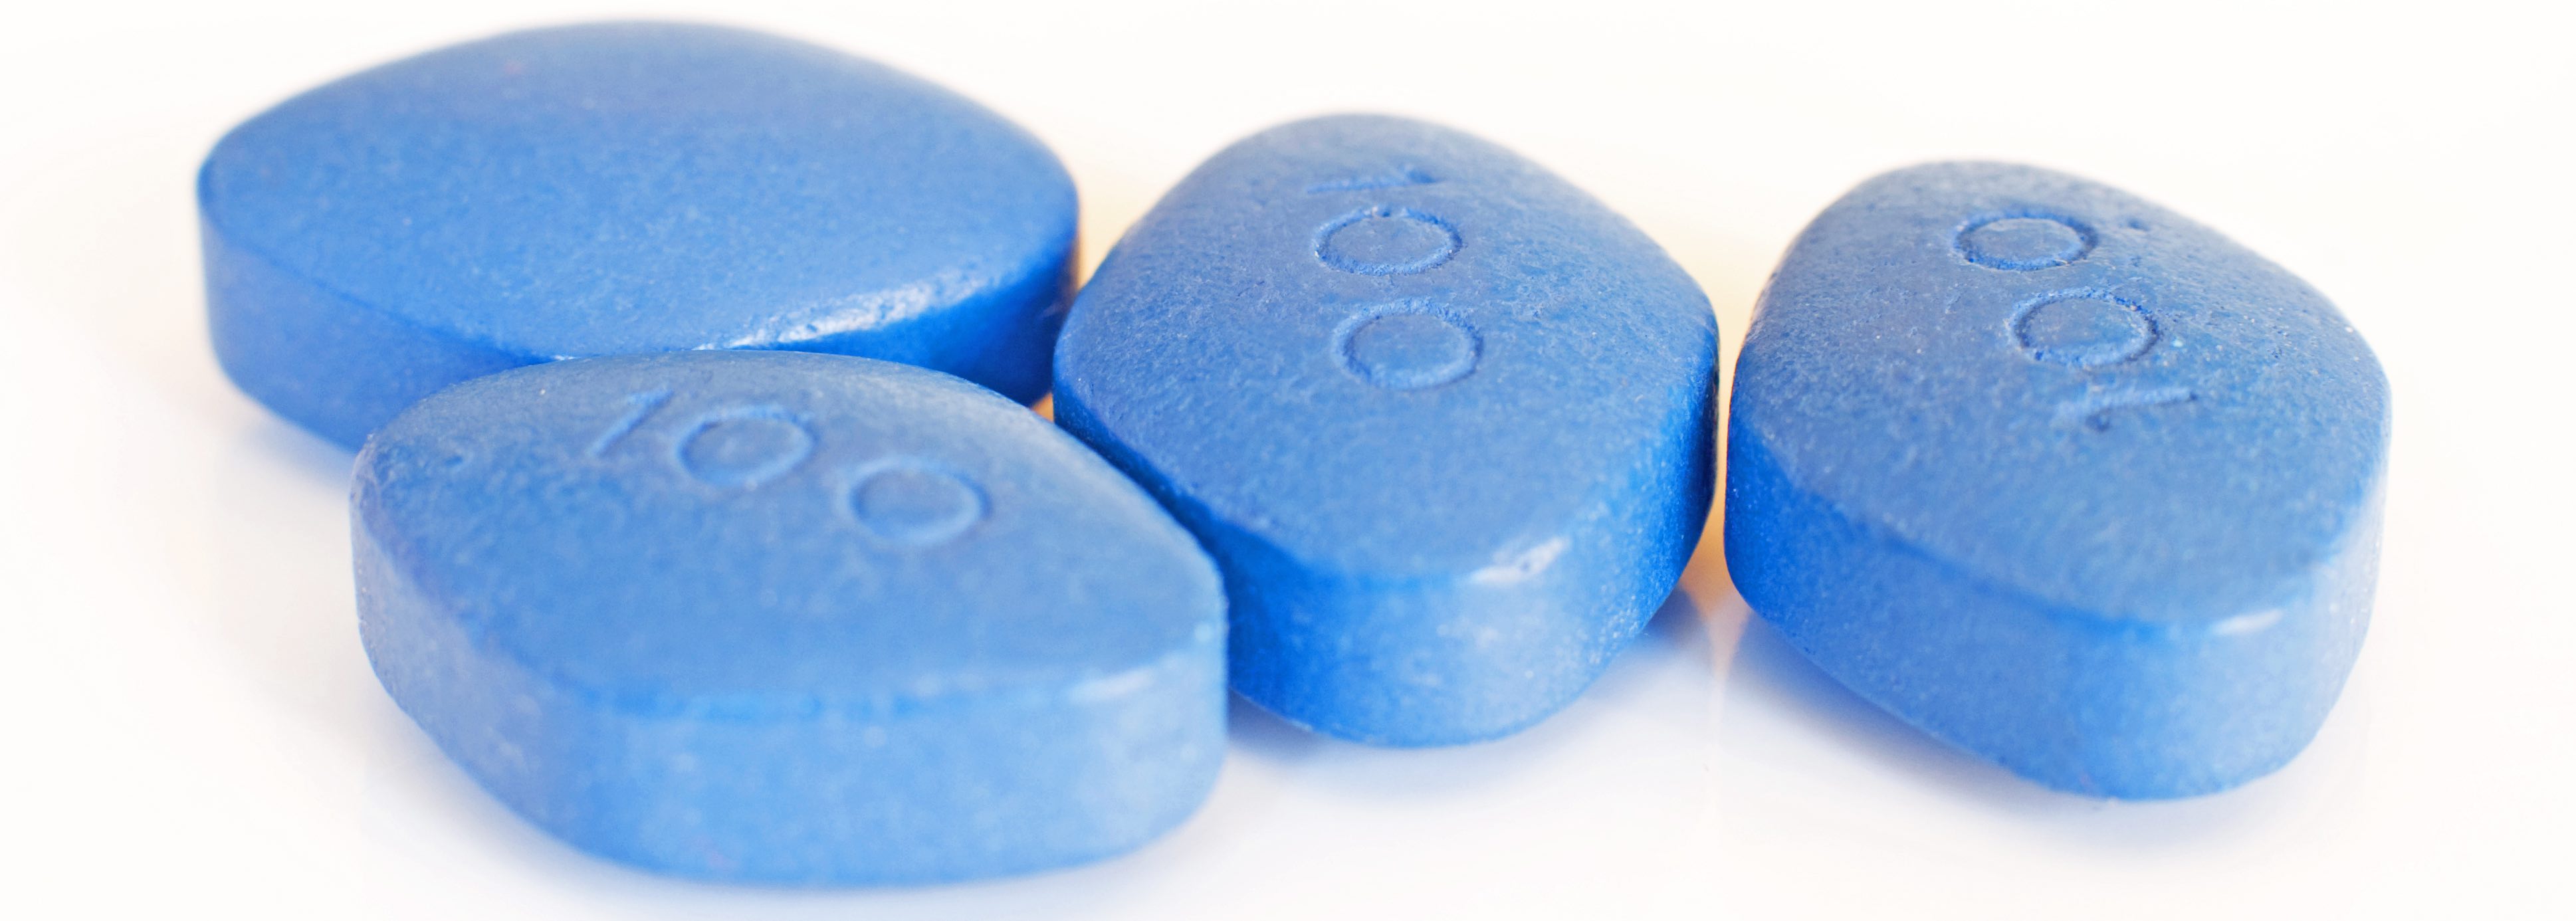 Viagra Pills Review The Benefits And Prices Of Erectile Dysfunction